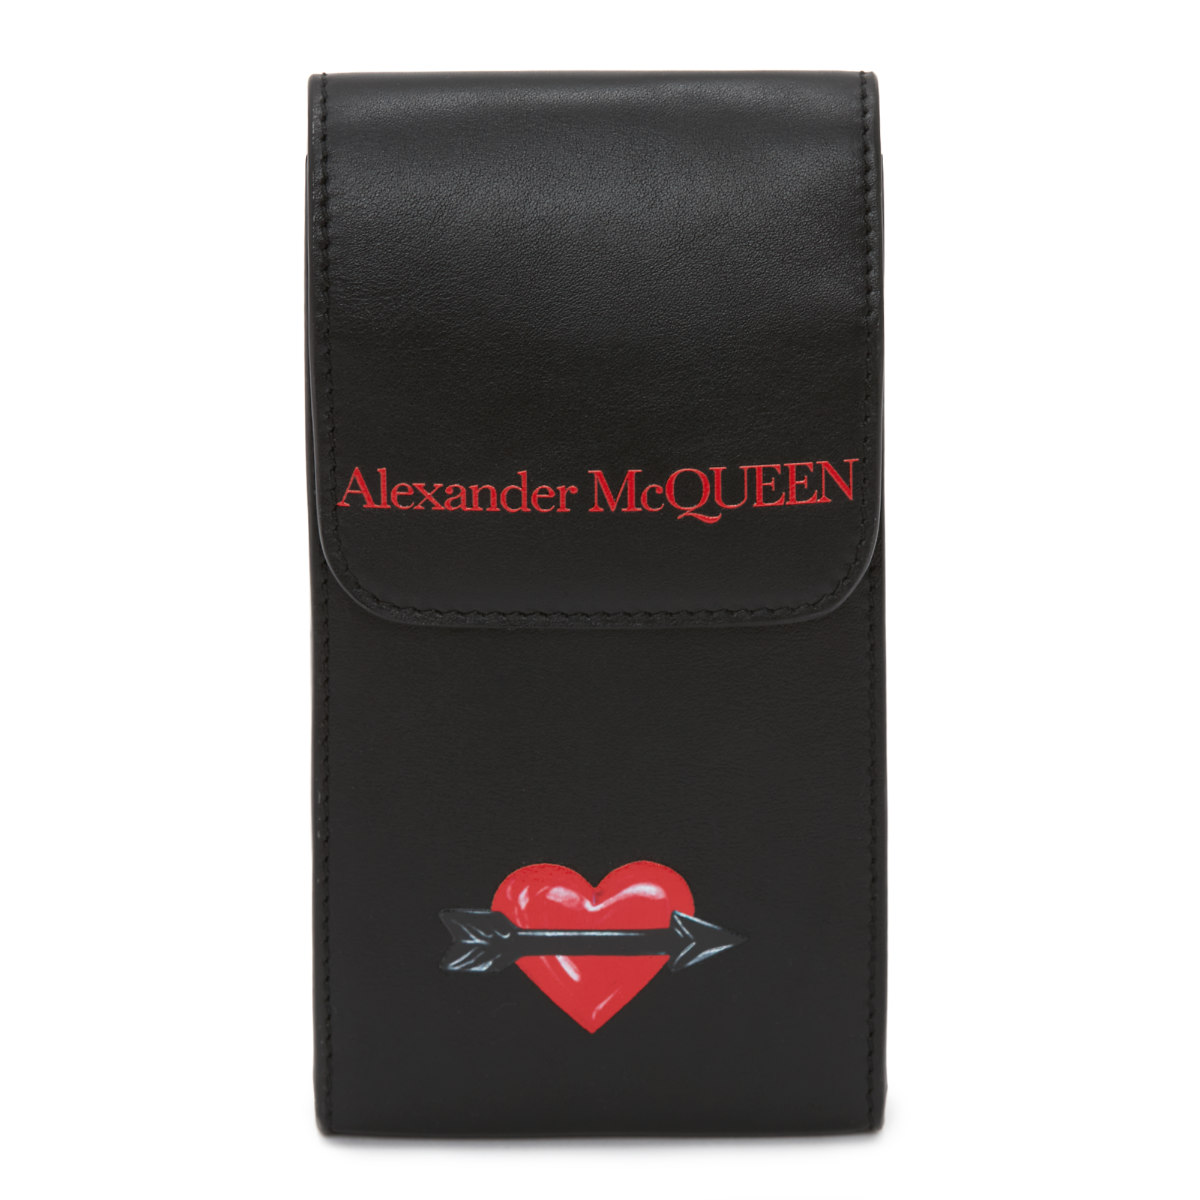 Alexander McQueen launched Special 2021 Valentine’s Day capsule collection